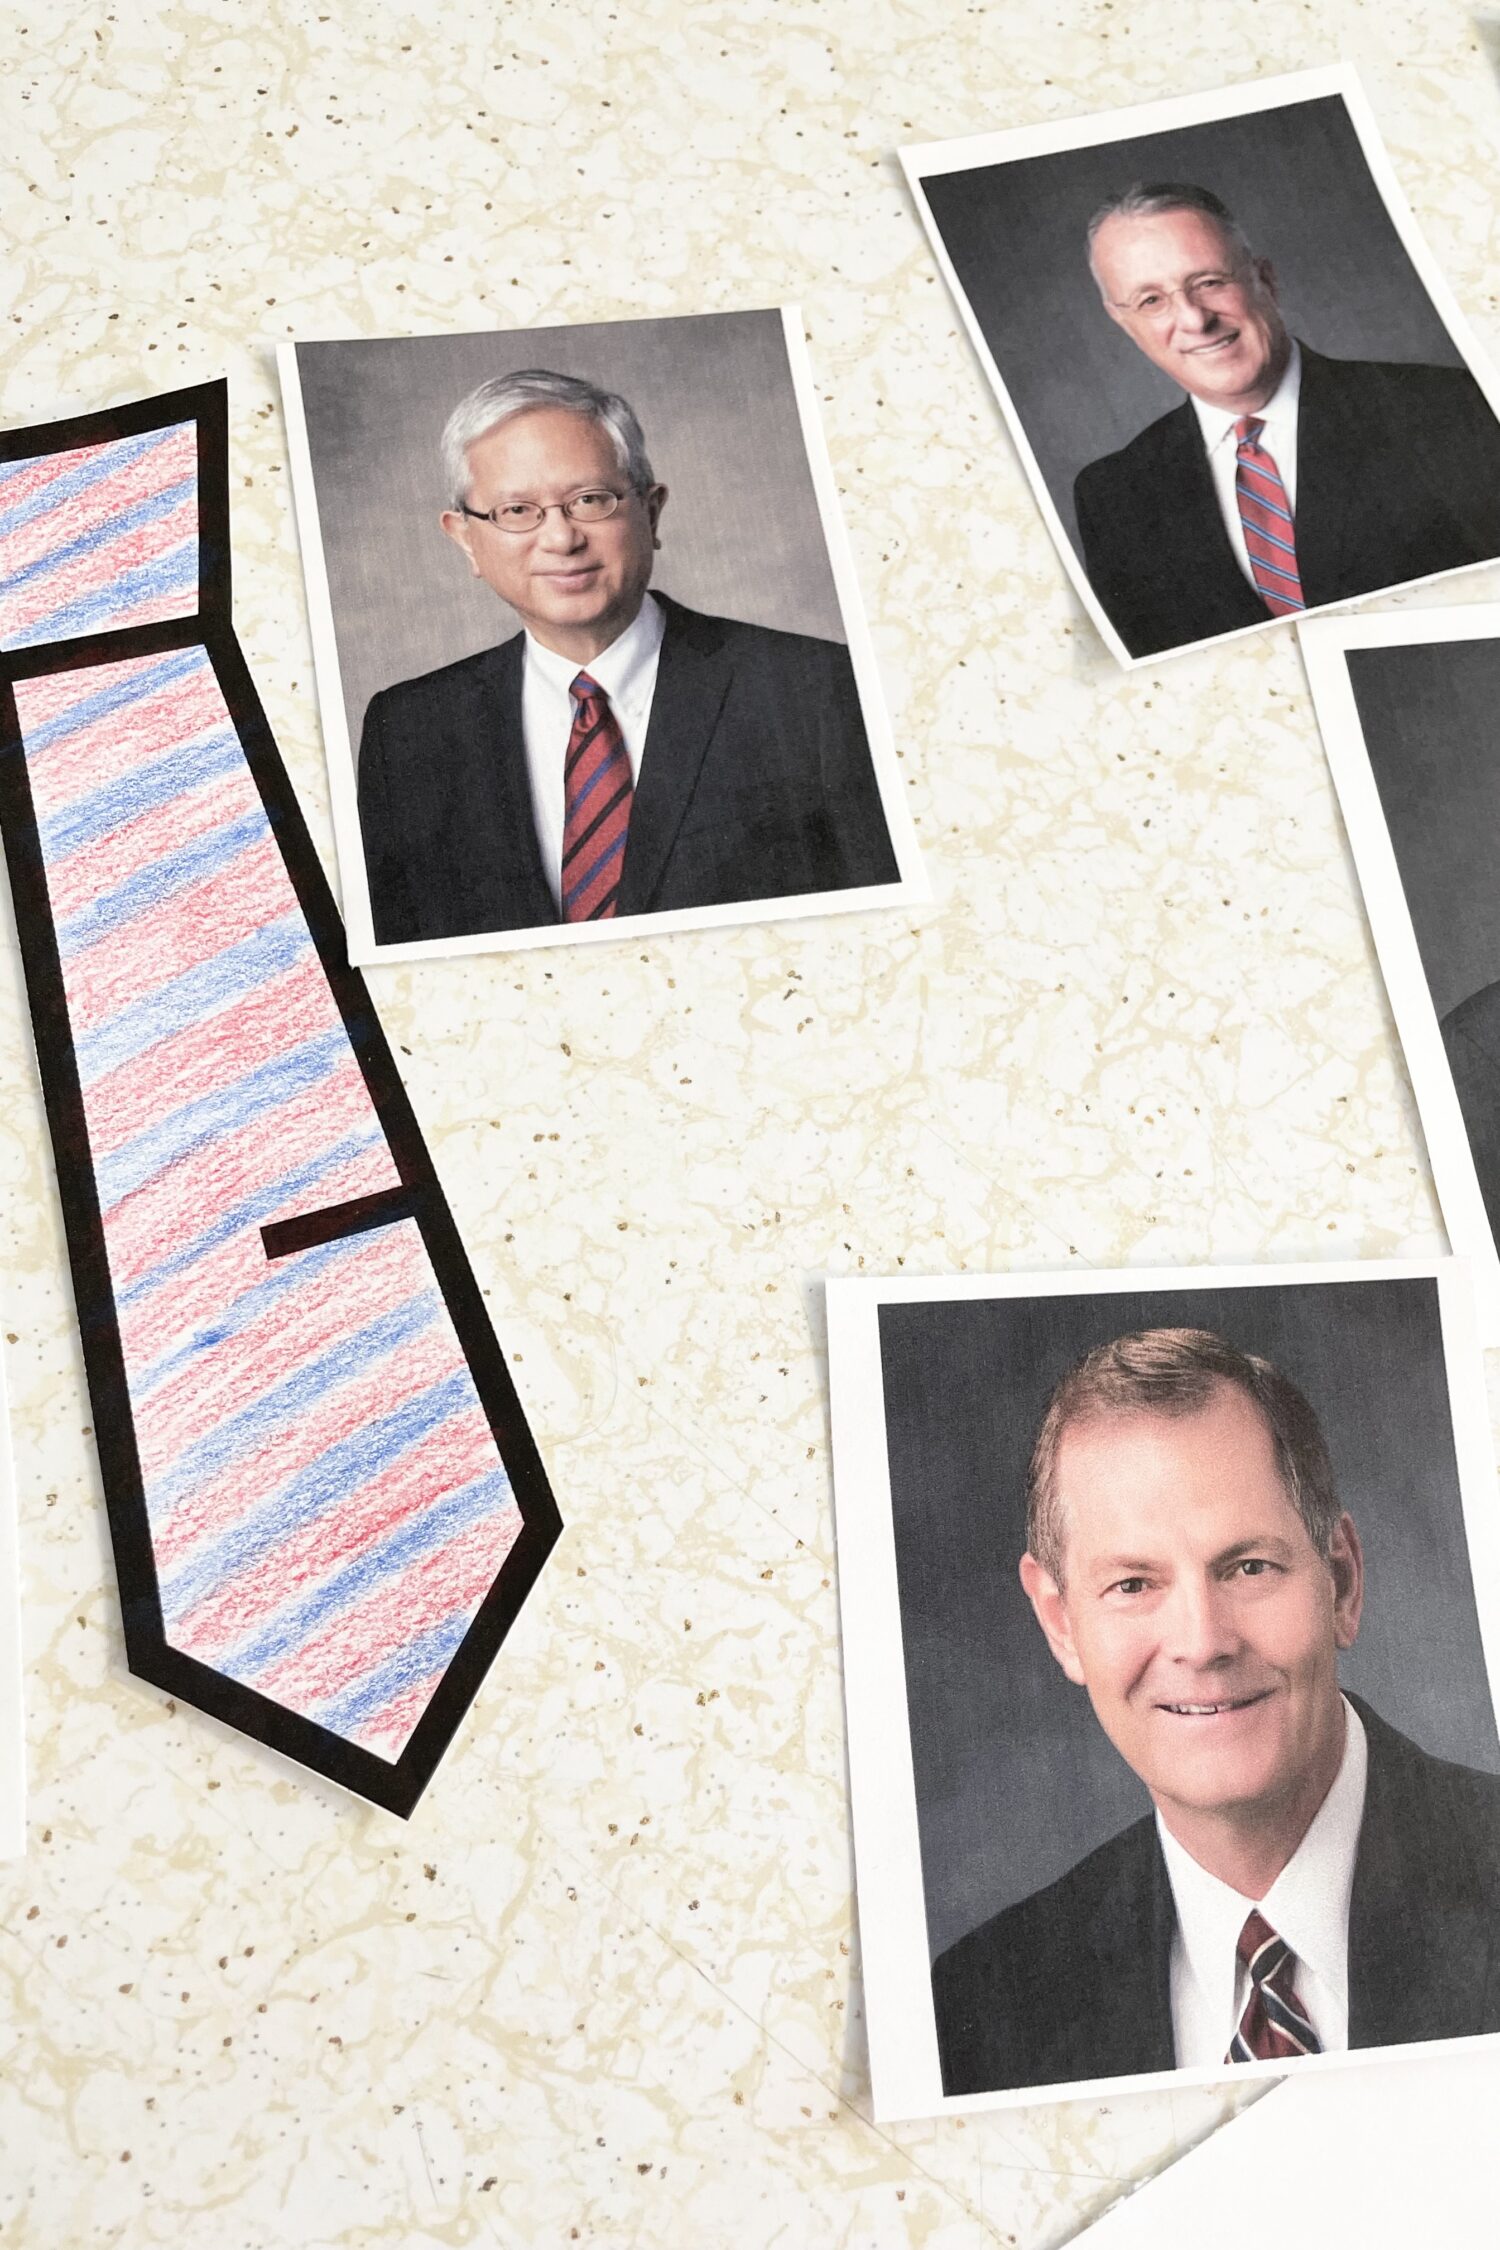 This fun General Conference Prophet Ties activity is a fun visual intrigue idea for children to decorate ties and match them to an apostle for LDS Primary Music Leaders.